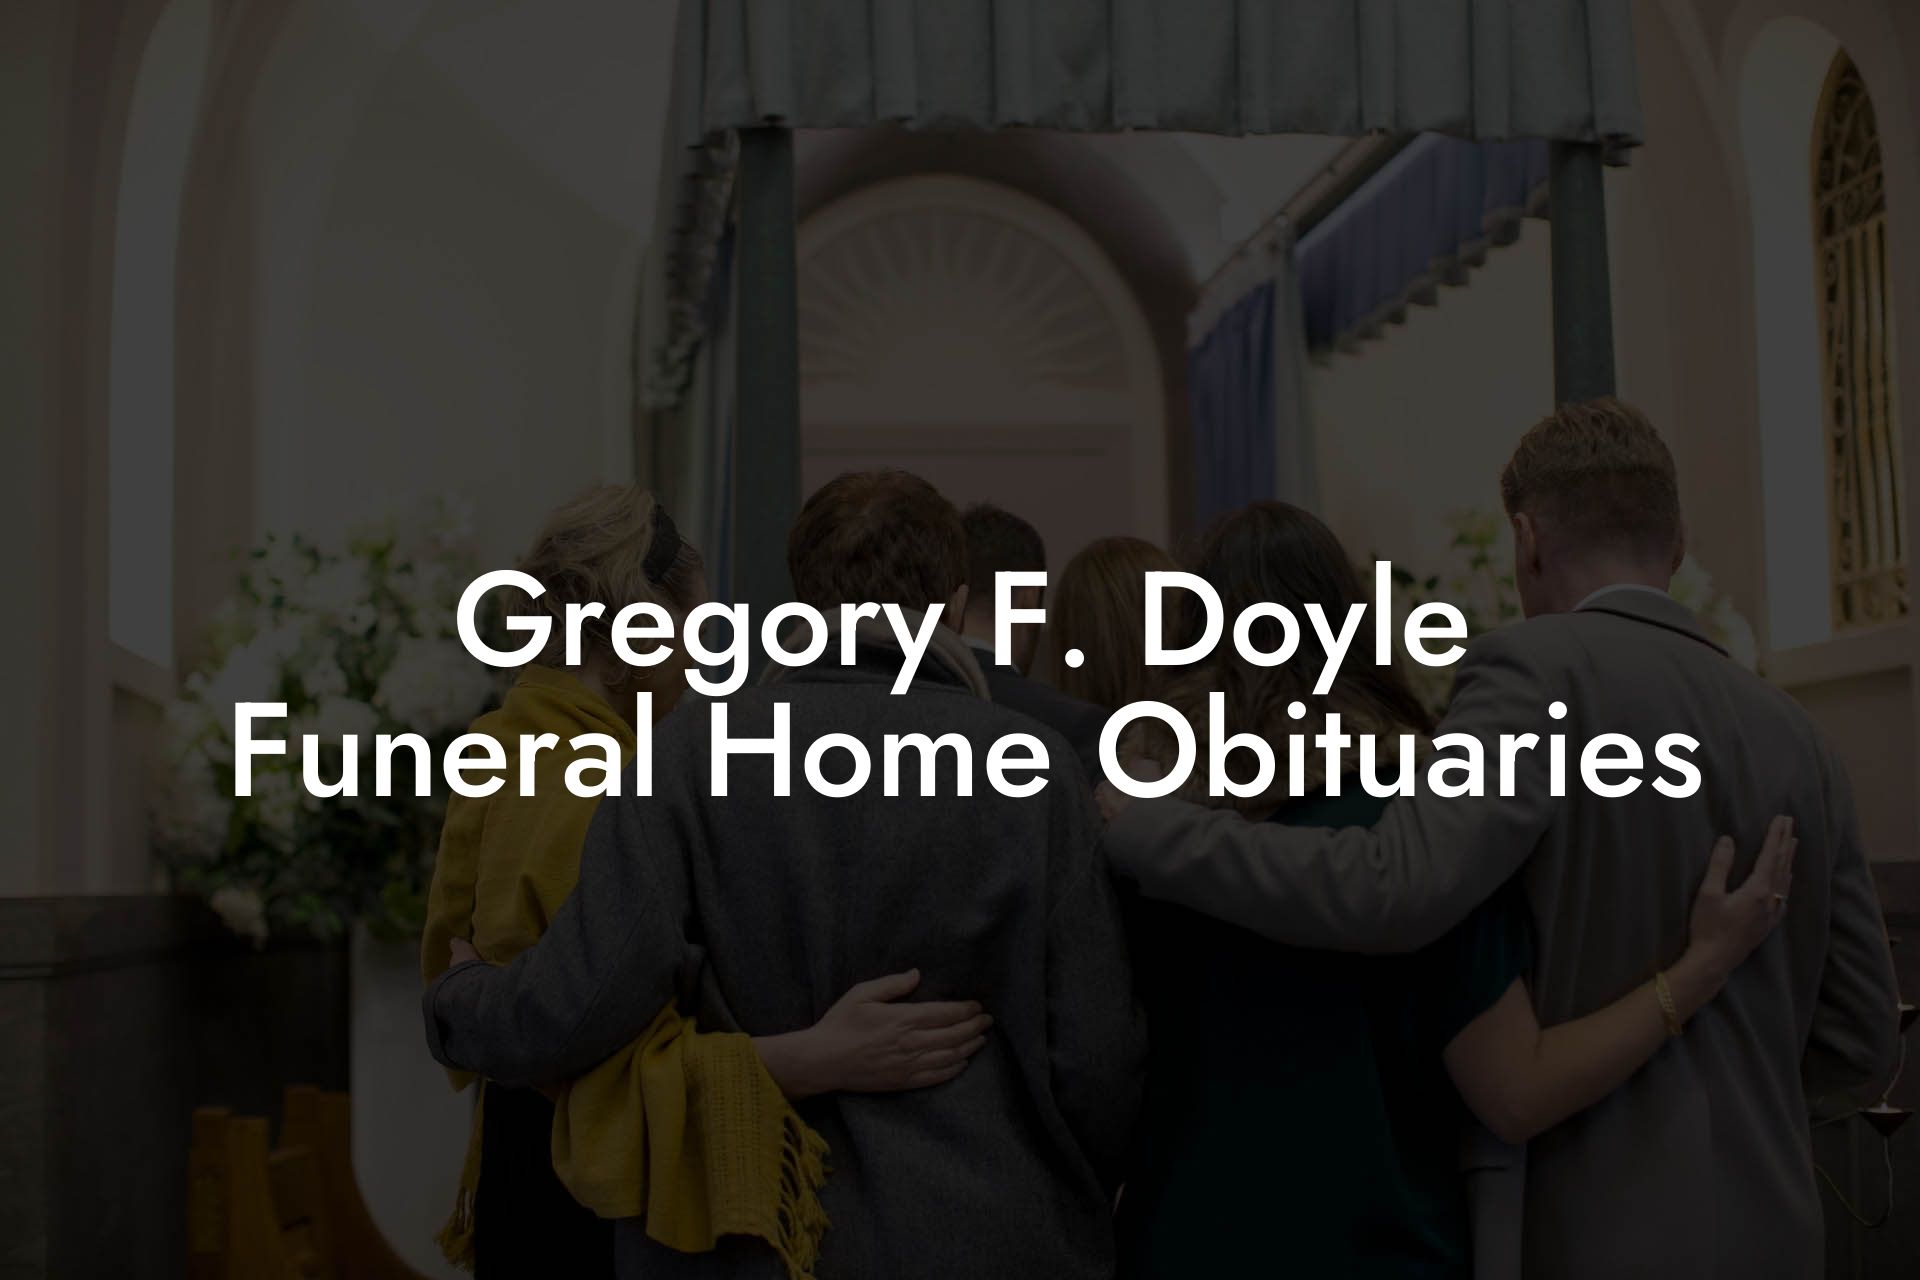 Gregory F. Doyle Funeral Home Obituaries